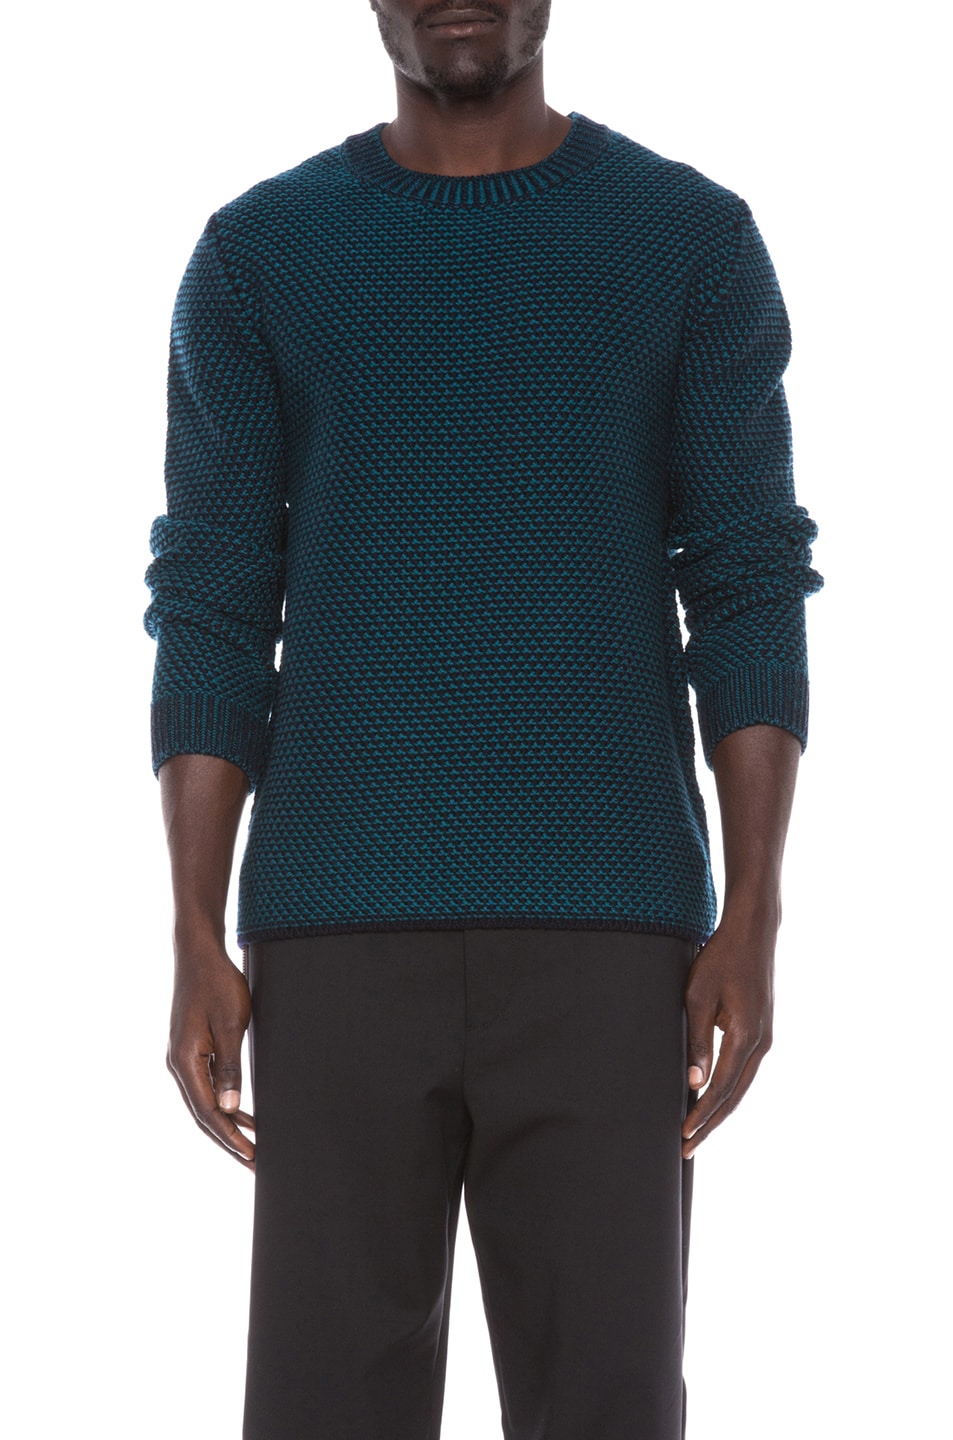 Image 1 of 3.1 phillip lim Wool Crochet Sweater in Teal